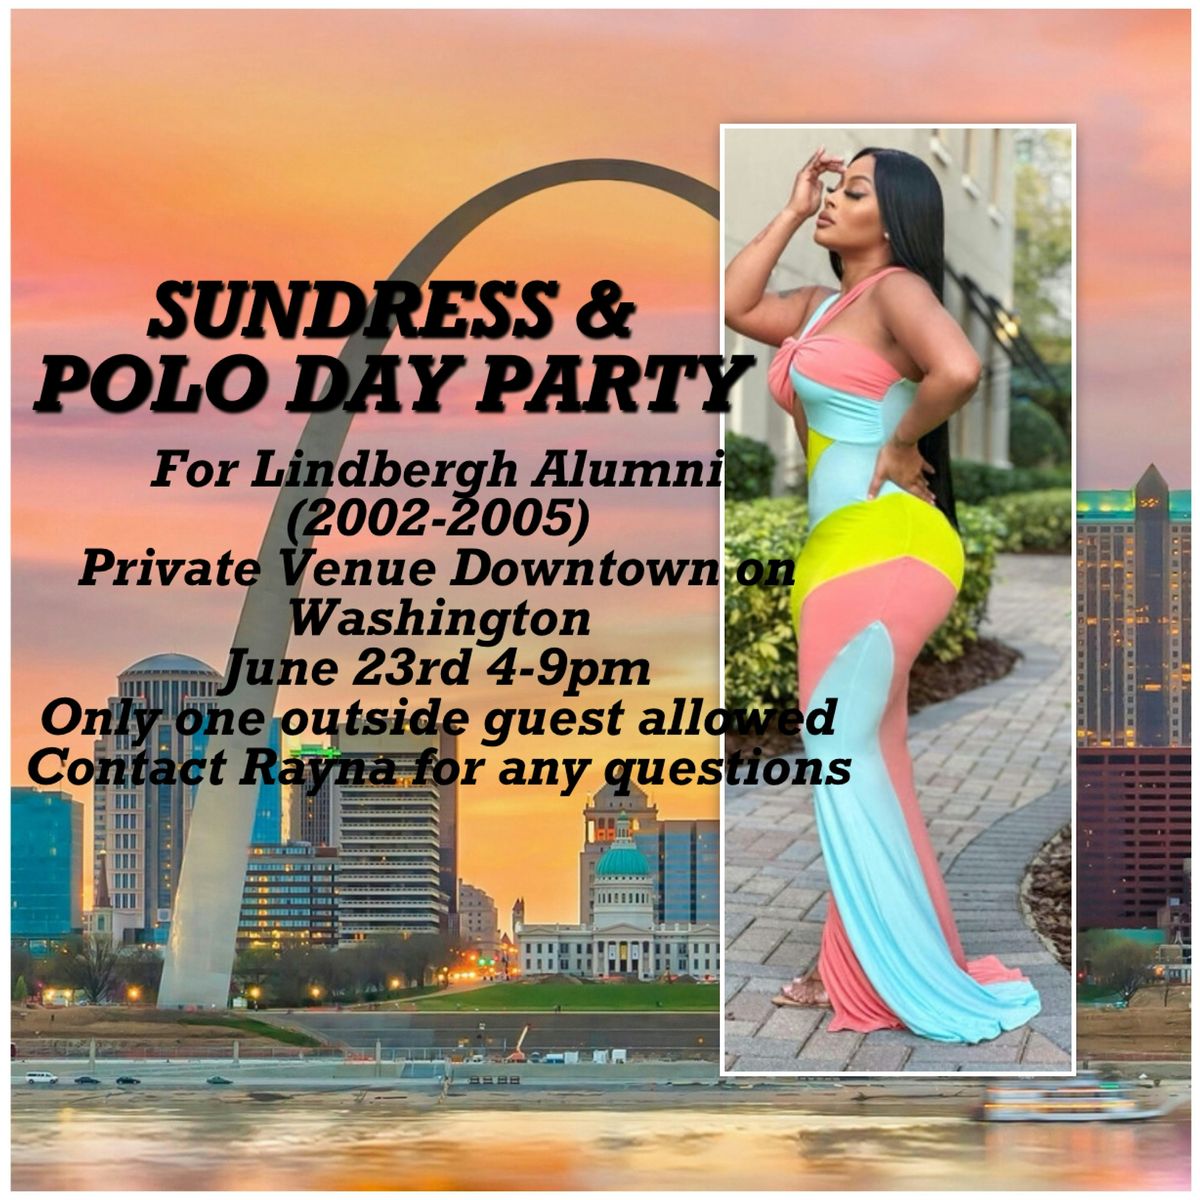 Sundress & Polo Day Party